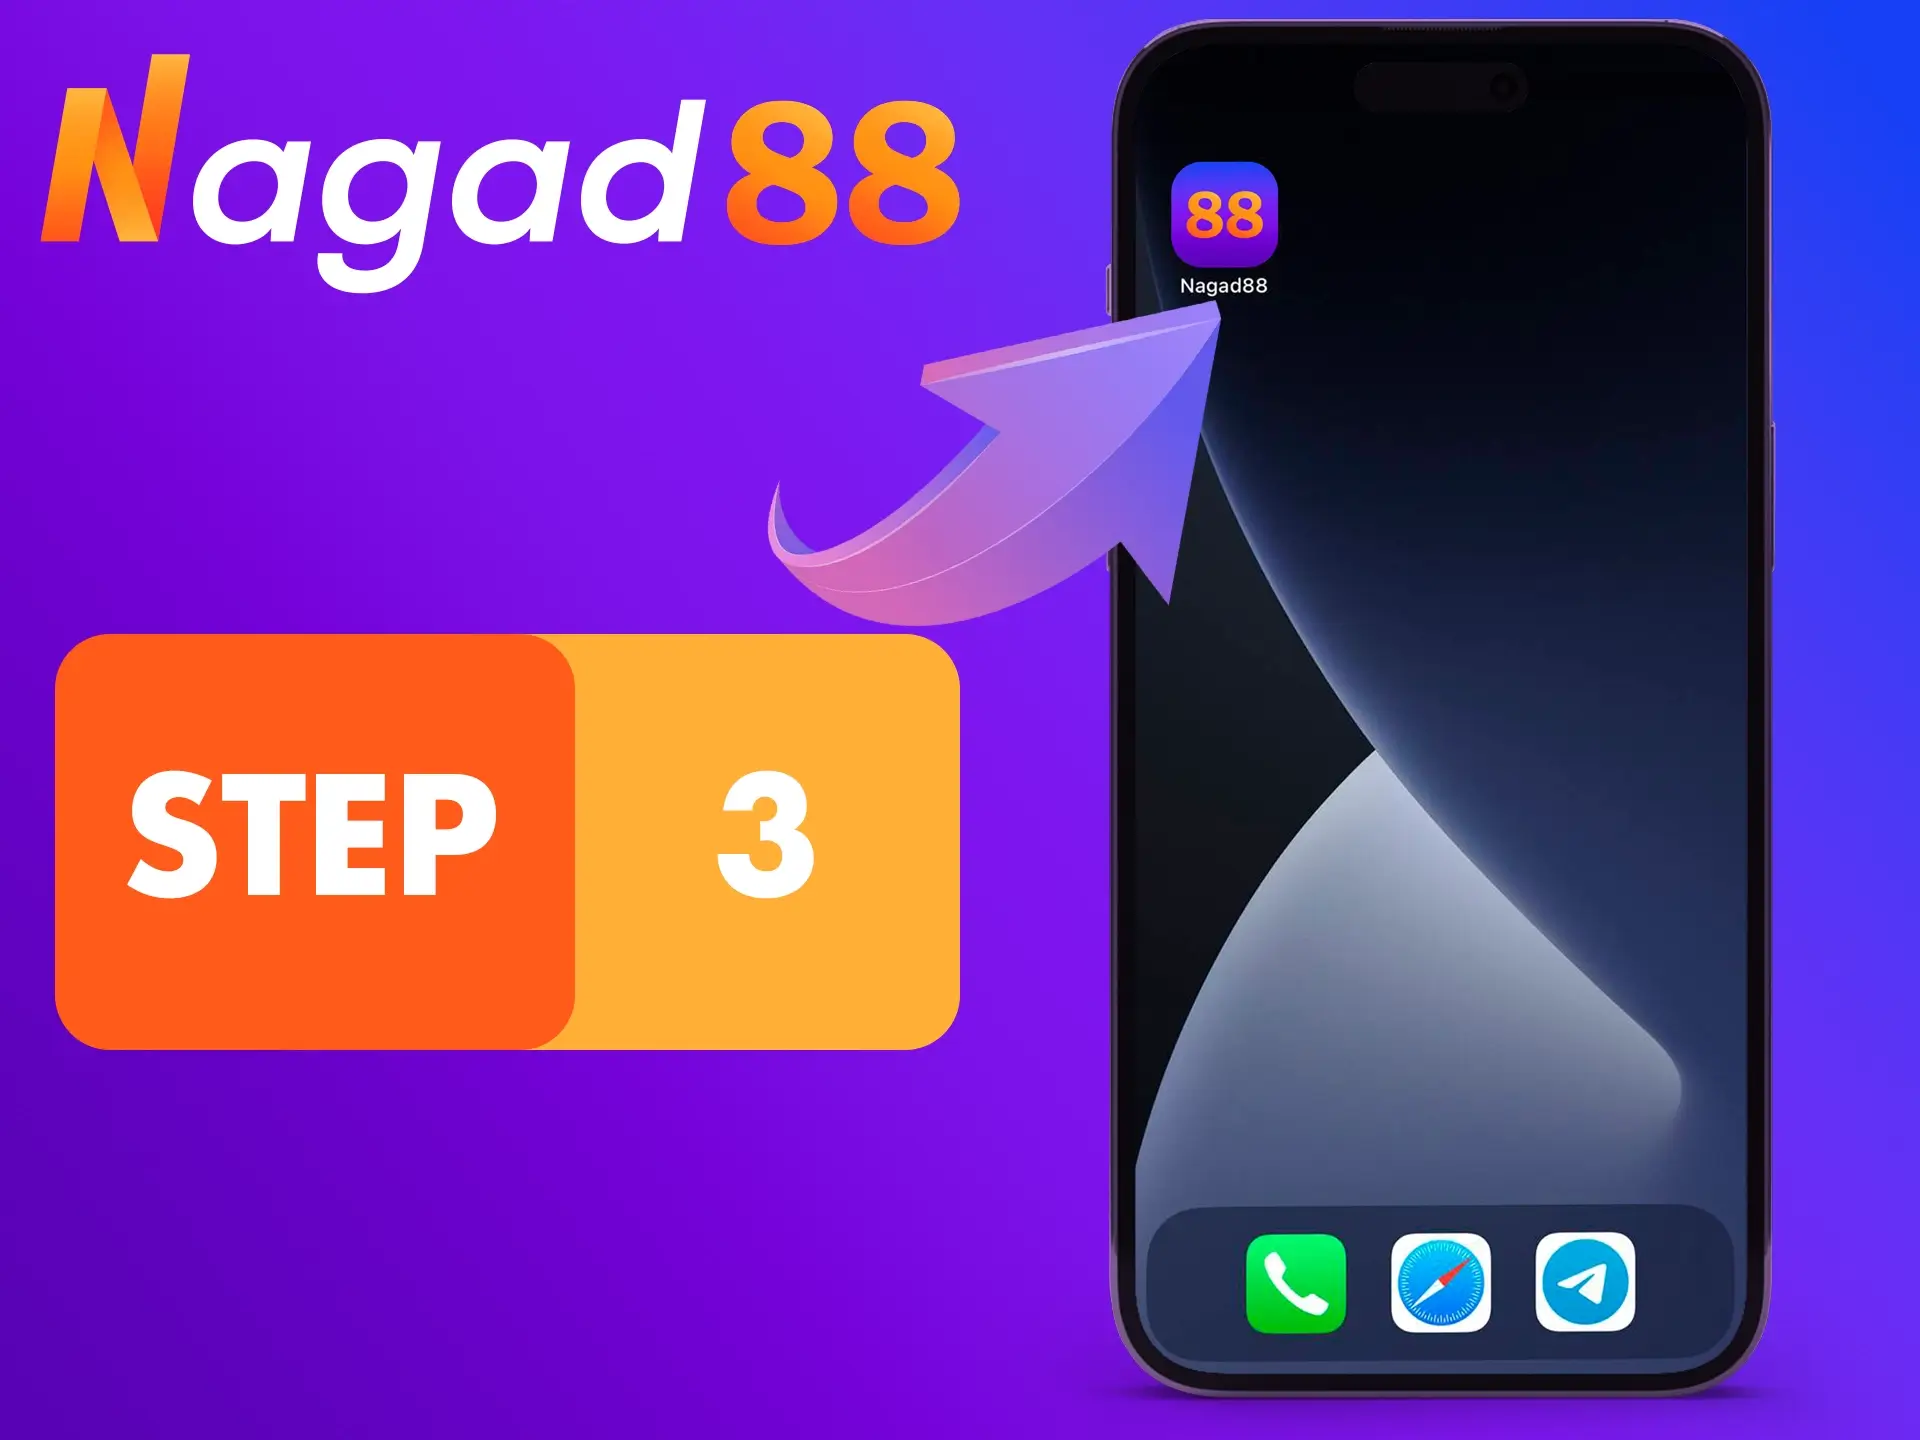 Launch the Nagad88 app from your phone's desktop.